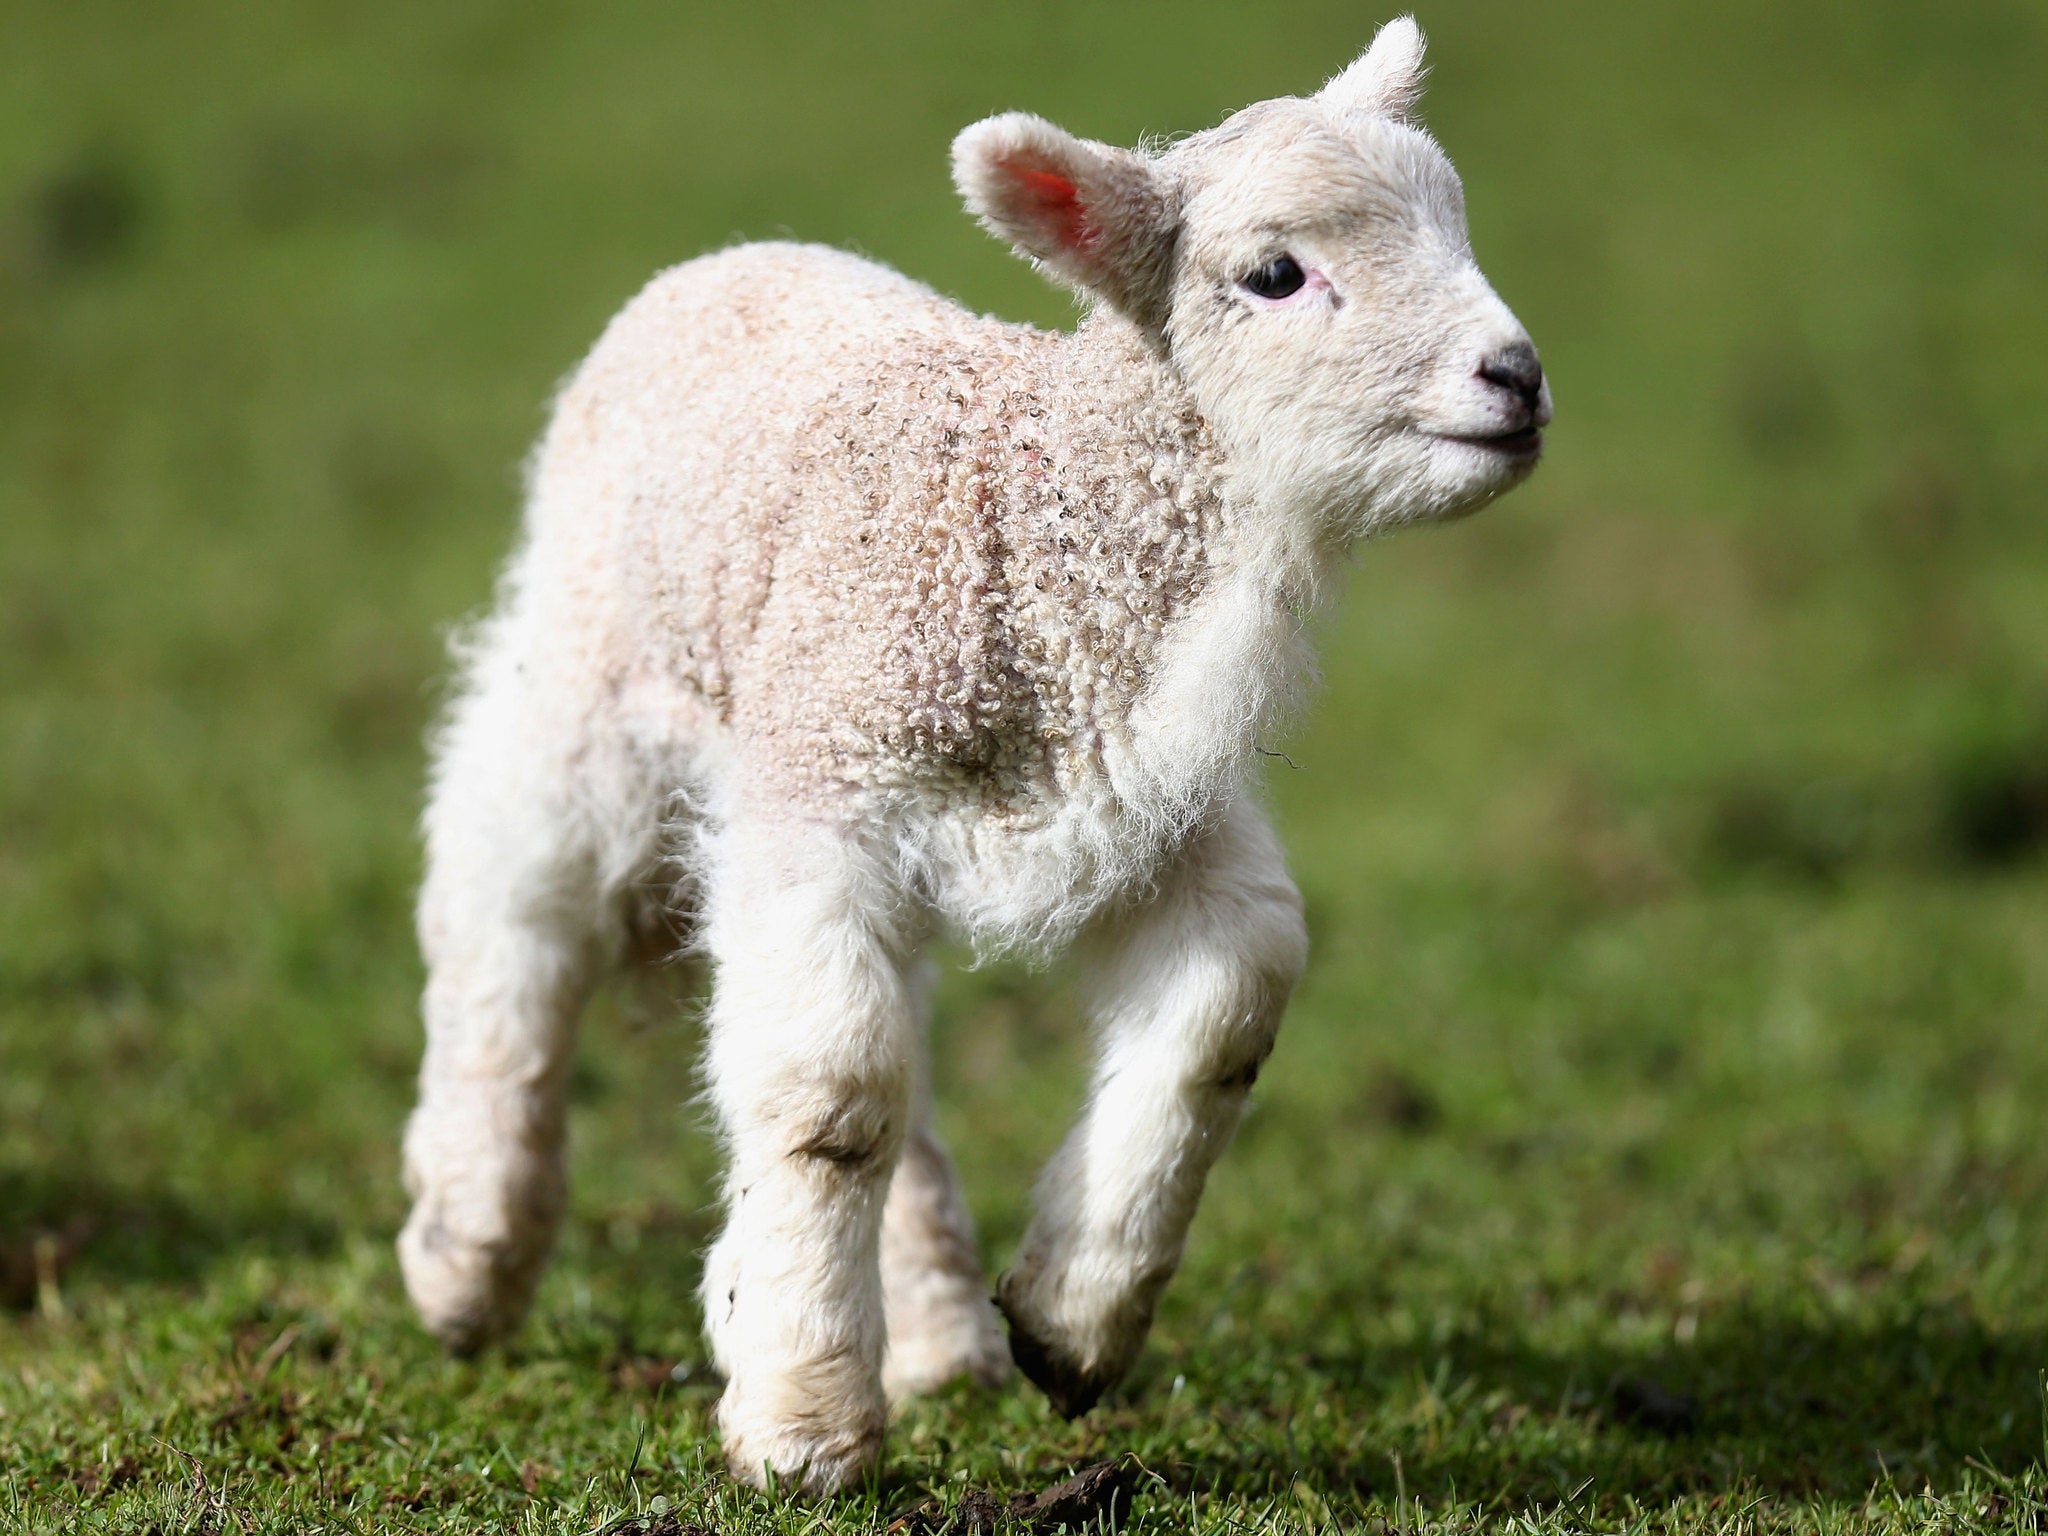 The lamb, intended for use as a research animal, made its way into the food chain